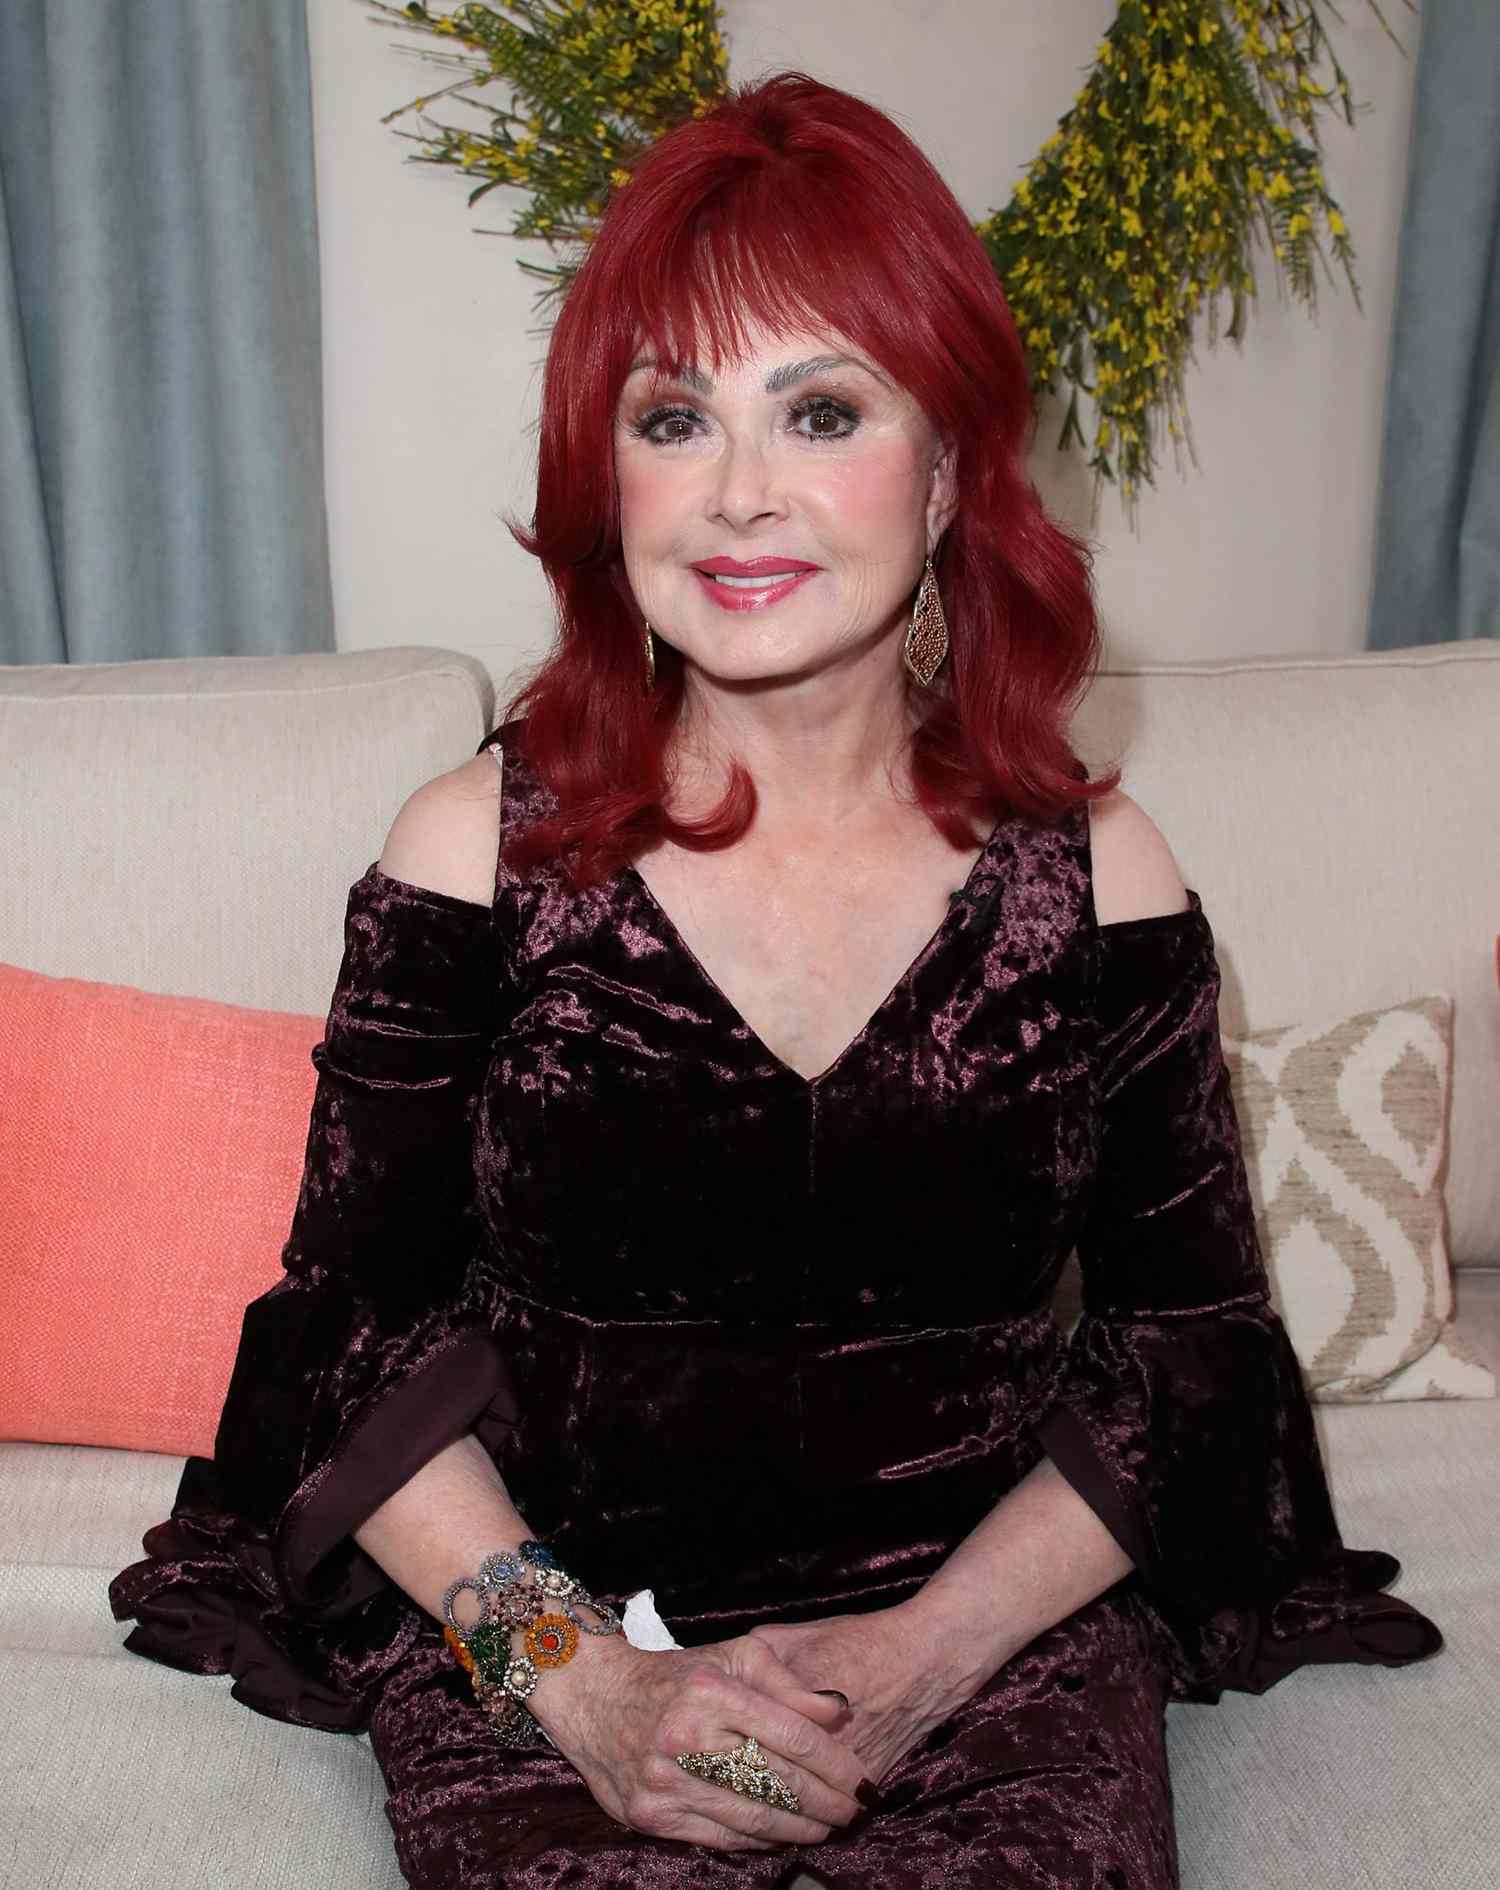 chris laurie recommends Pictures Of Naomi Judd